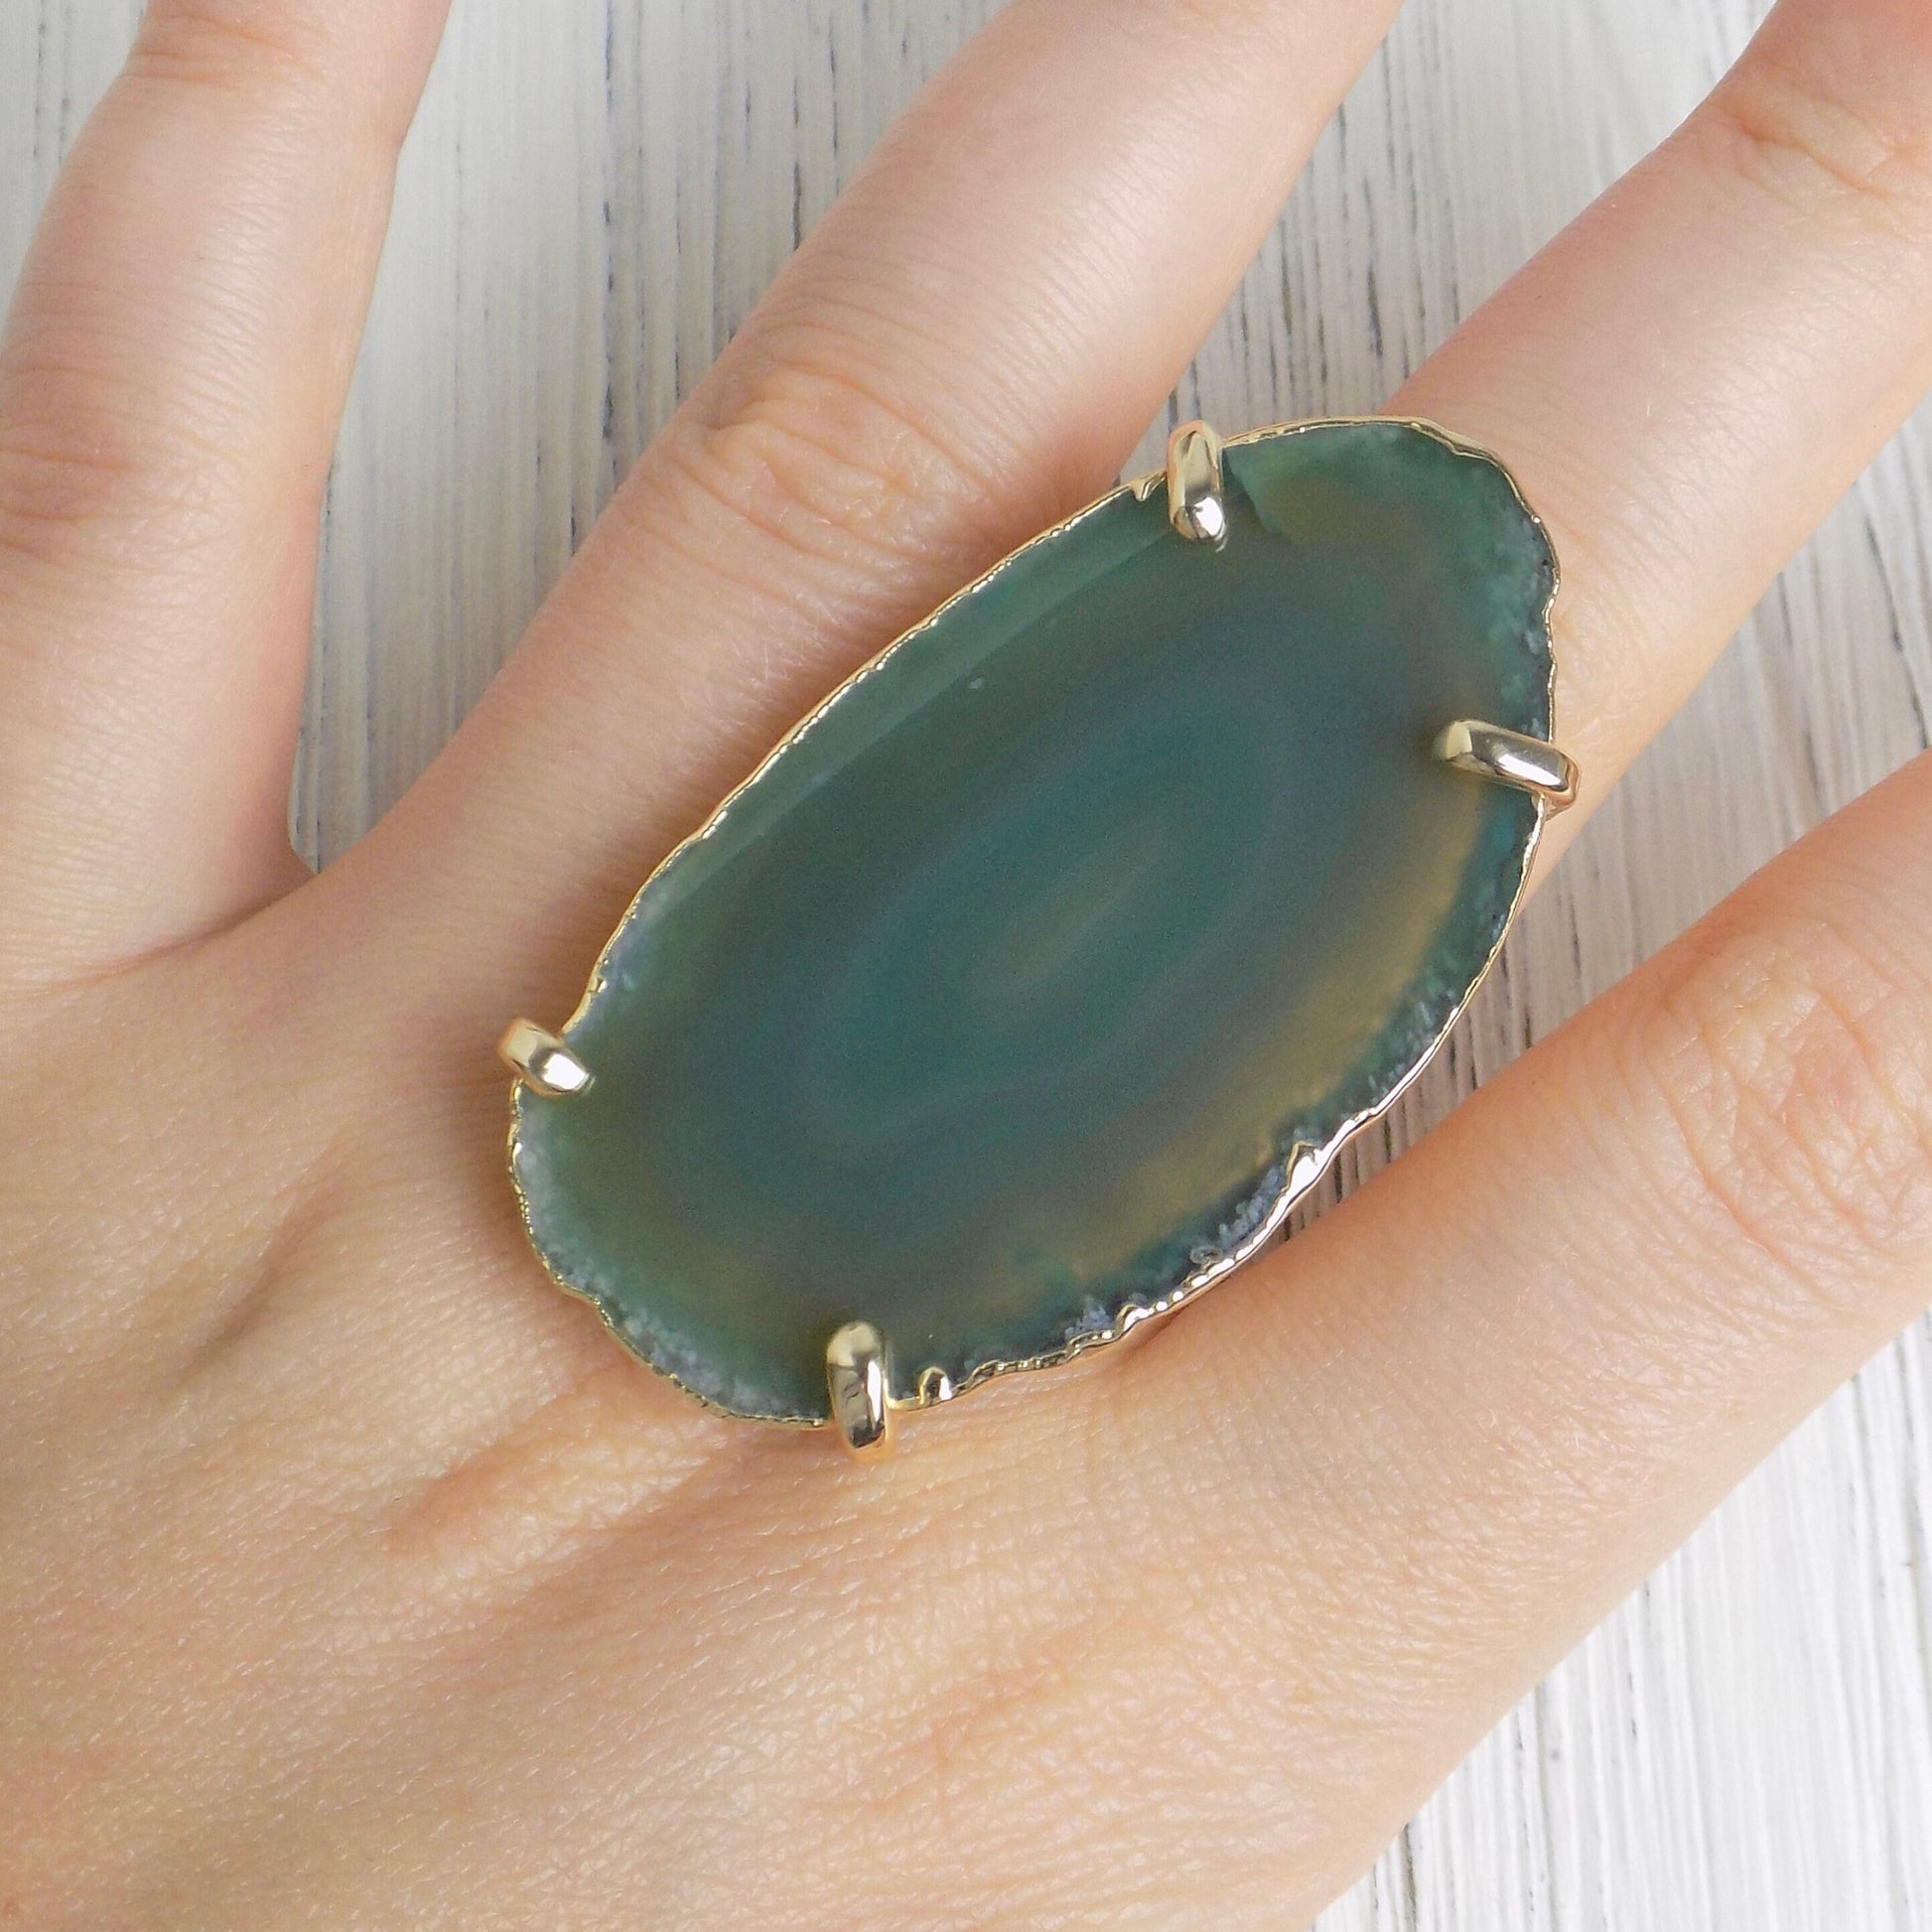 Green Agate Ring Gold, Statement Sliced Geode Ring, Boho Stone Ring Adjustable, Wedding Jewelry, G14-216